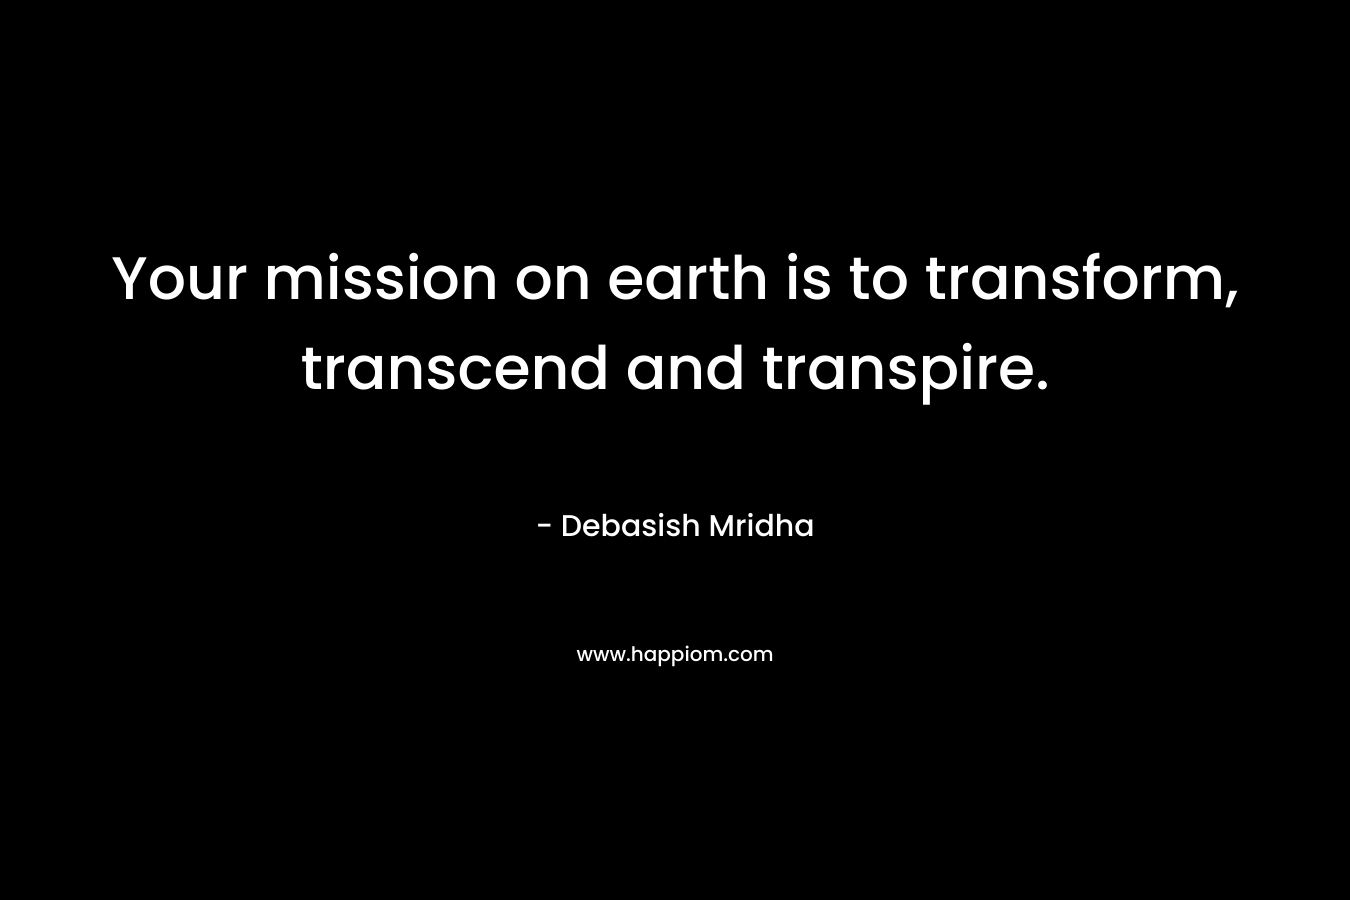 Your mission on earth is to transform, transcend and transpire. – Debasish Mridha